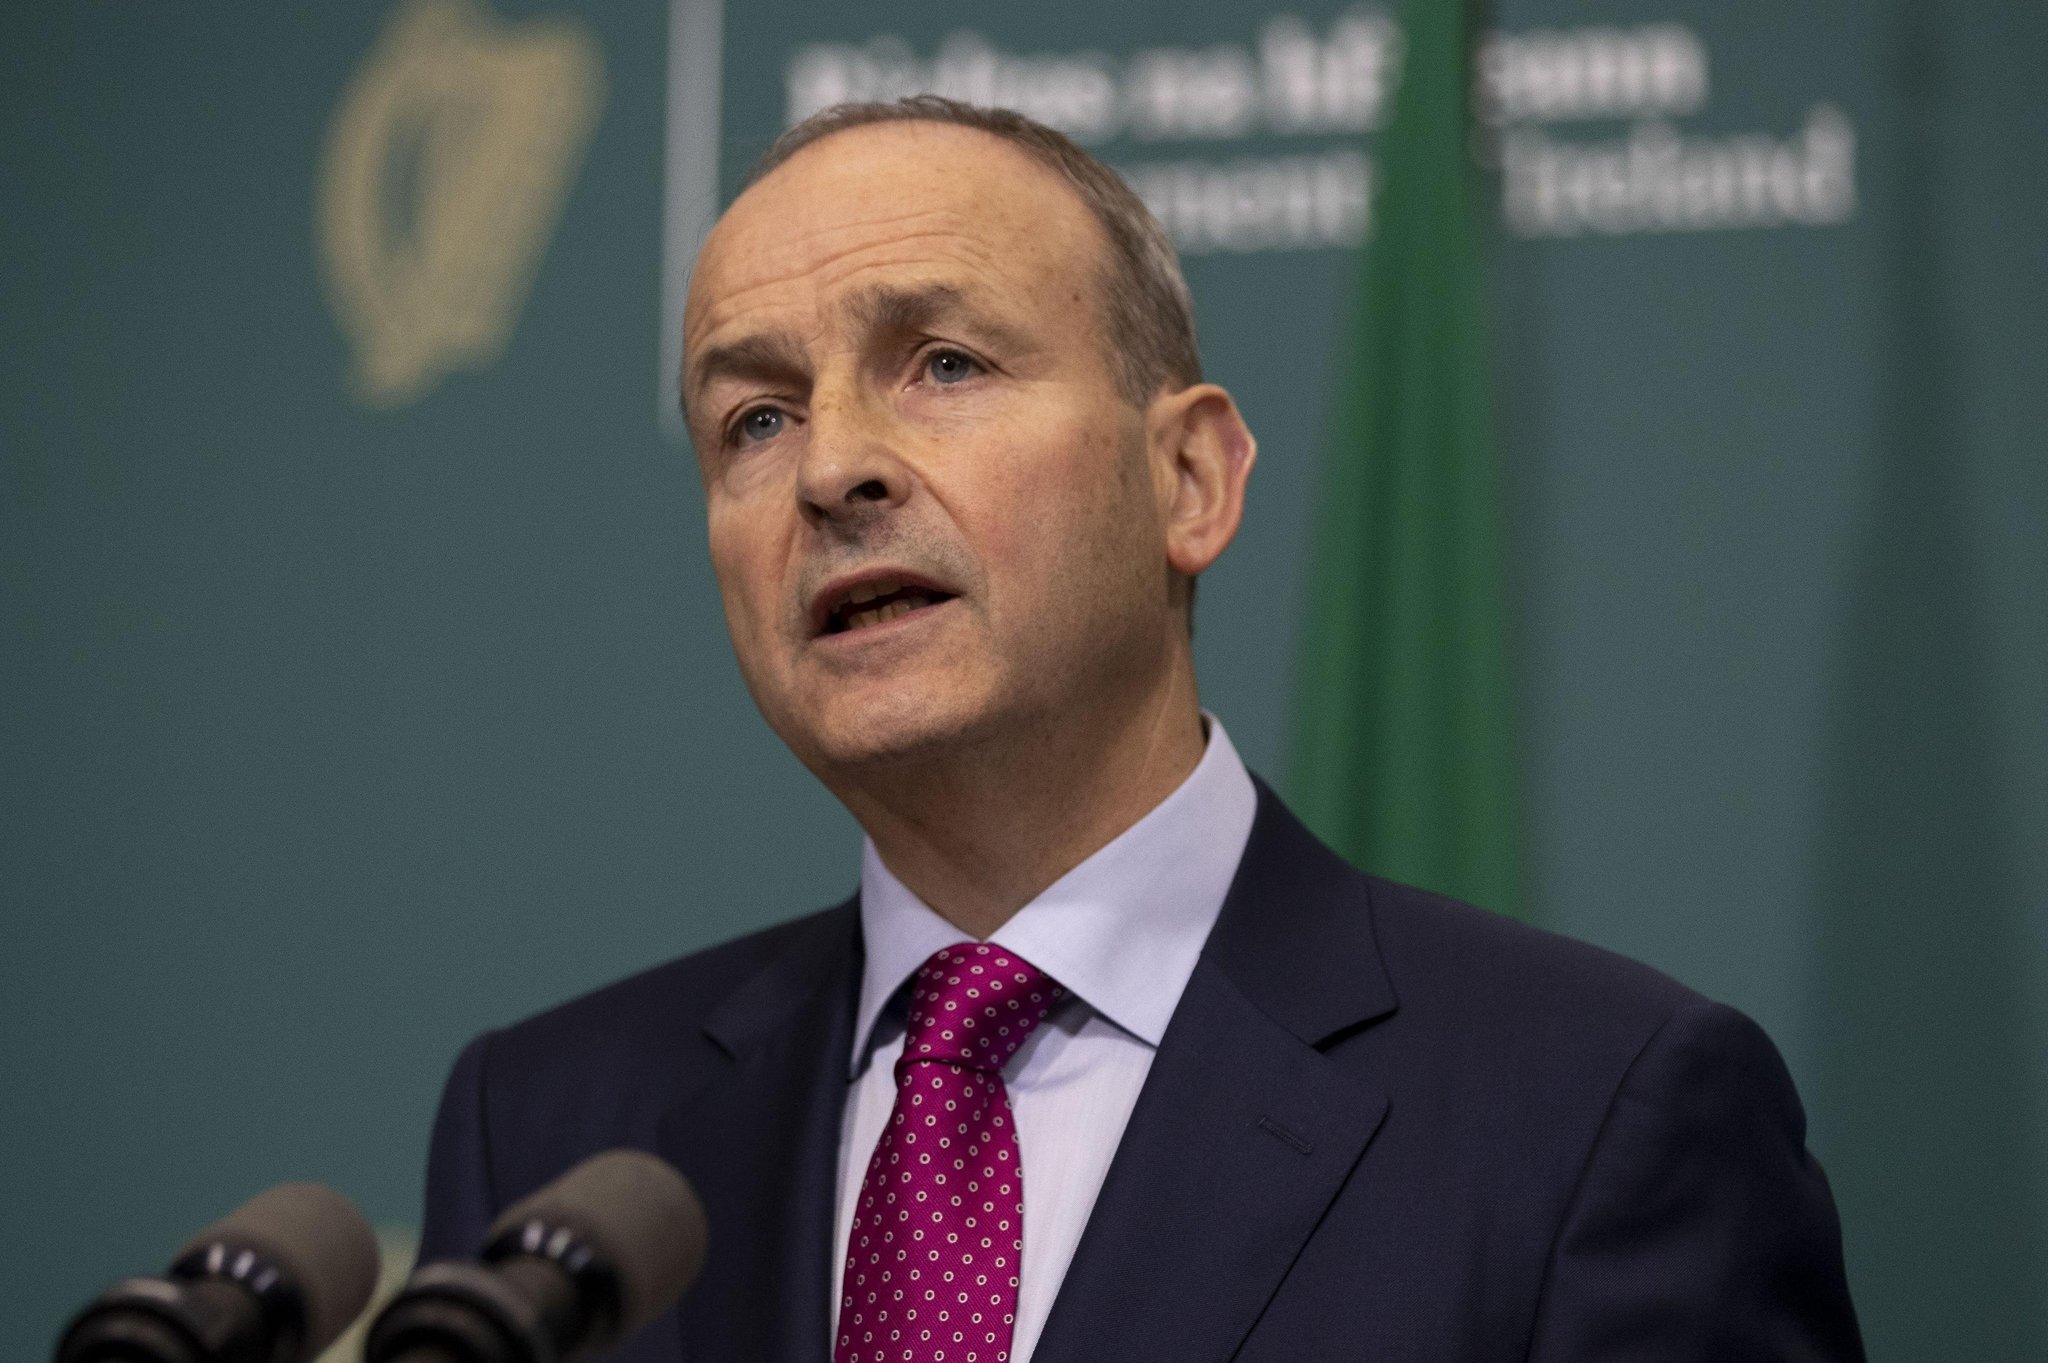 Taoiseach to speak at Hume Foundation seminar in Londonderry